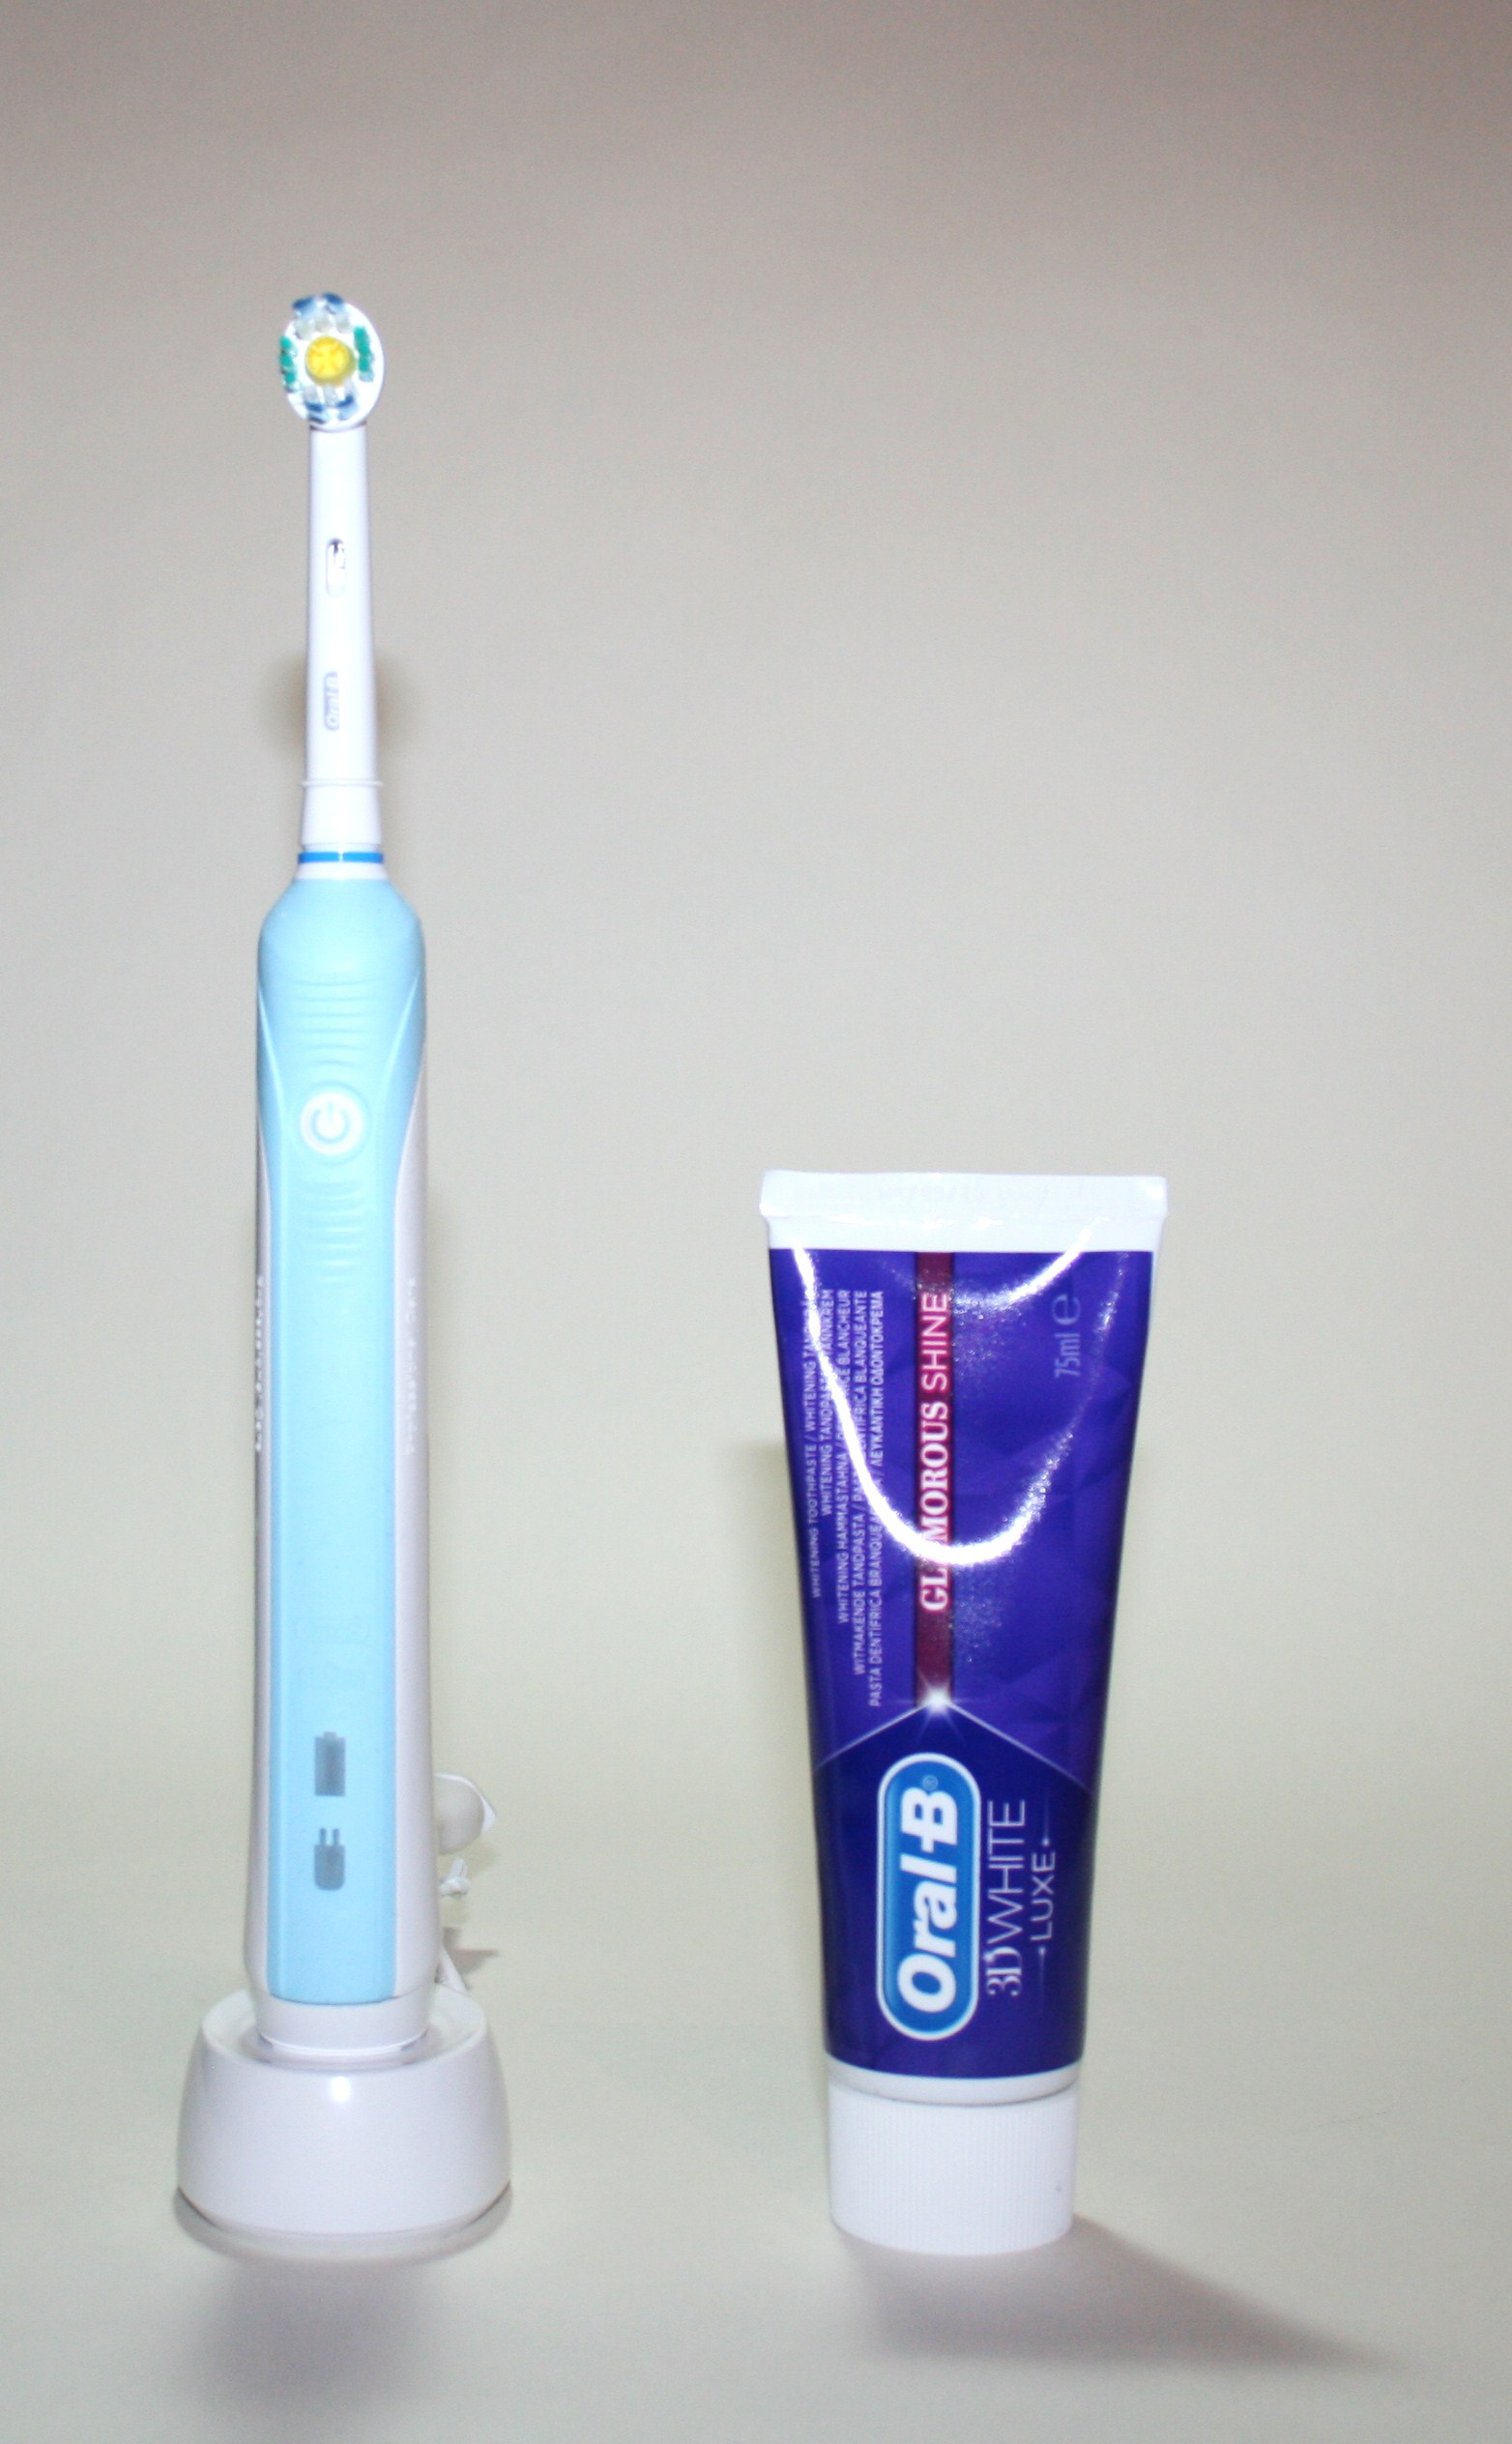 The Oral B White Collection